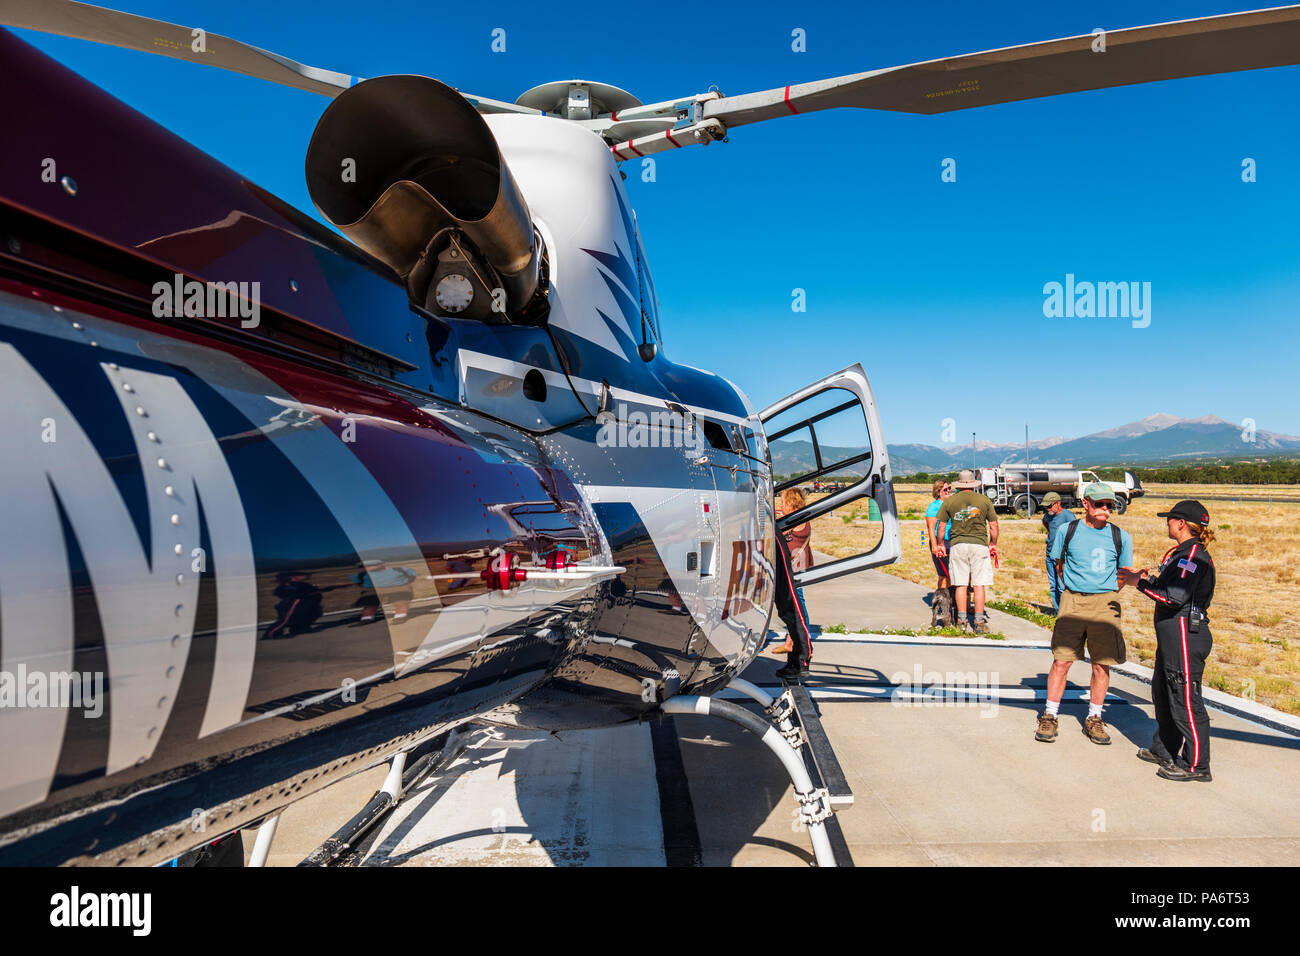 Rejoindre Air Medical Services Airbus Helicopters ; COMME350 École cureuil hélicoptère ; Salida fly-in et spectacle aérien ; Salida Colorado ; USA ; Banque D'Images